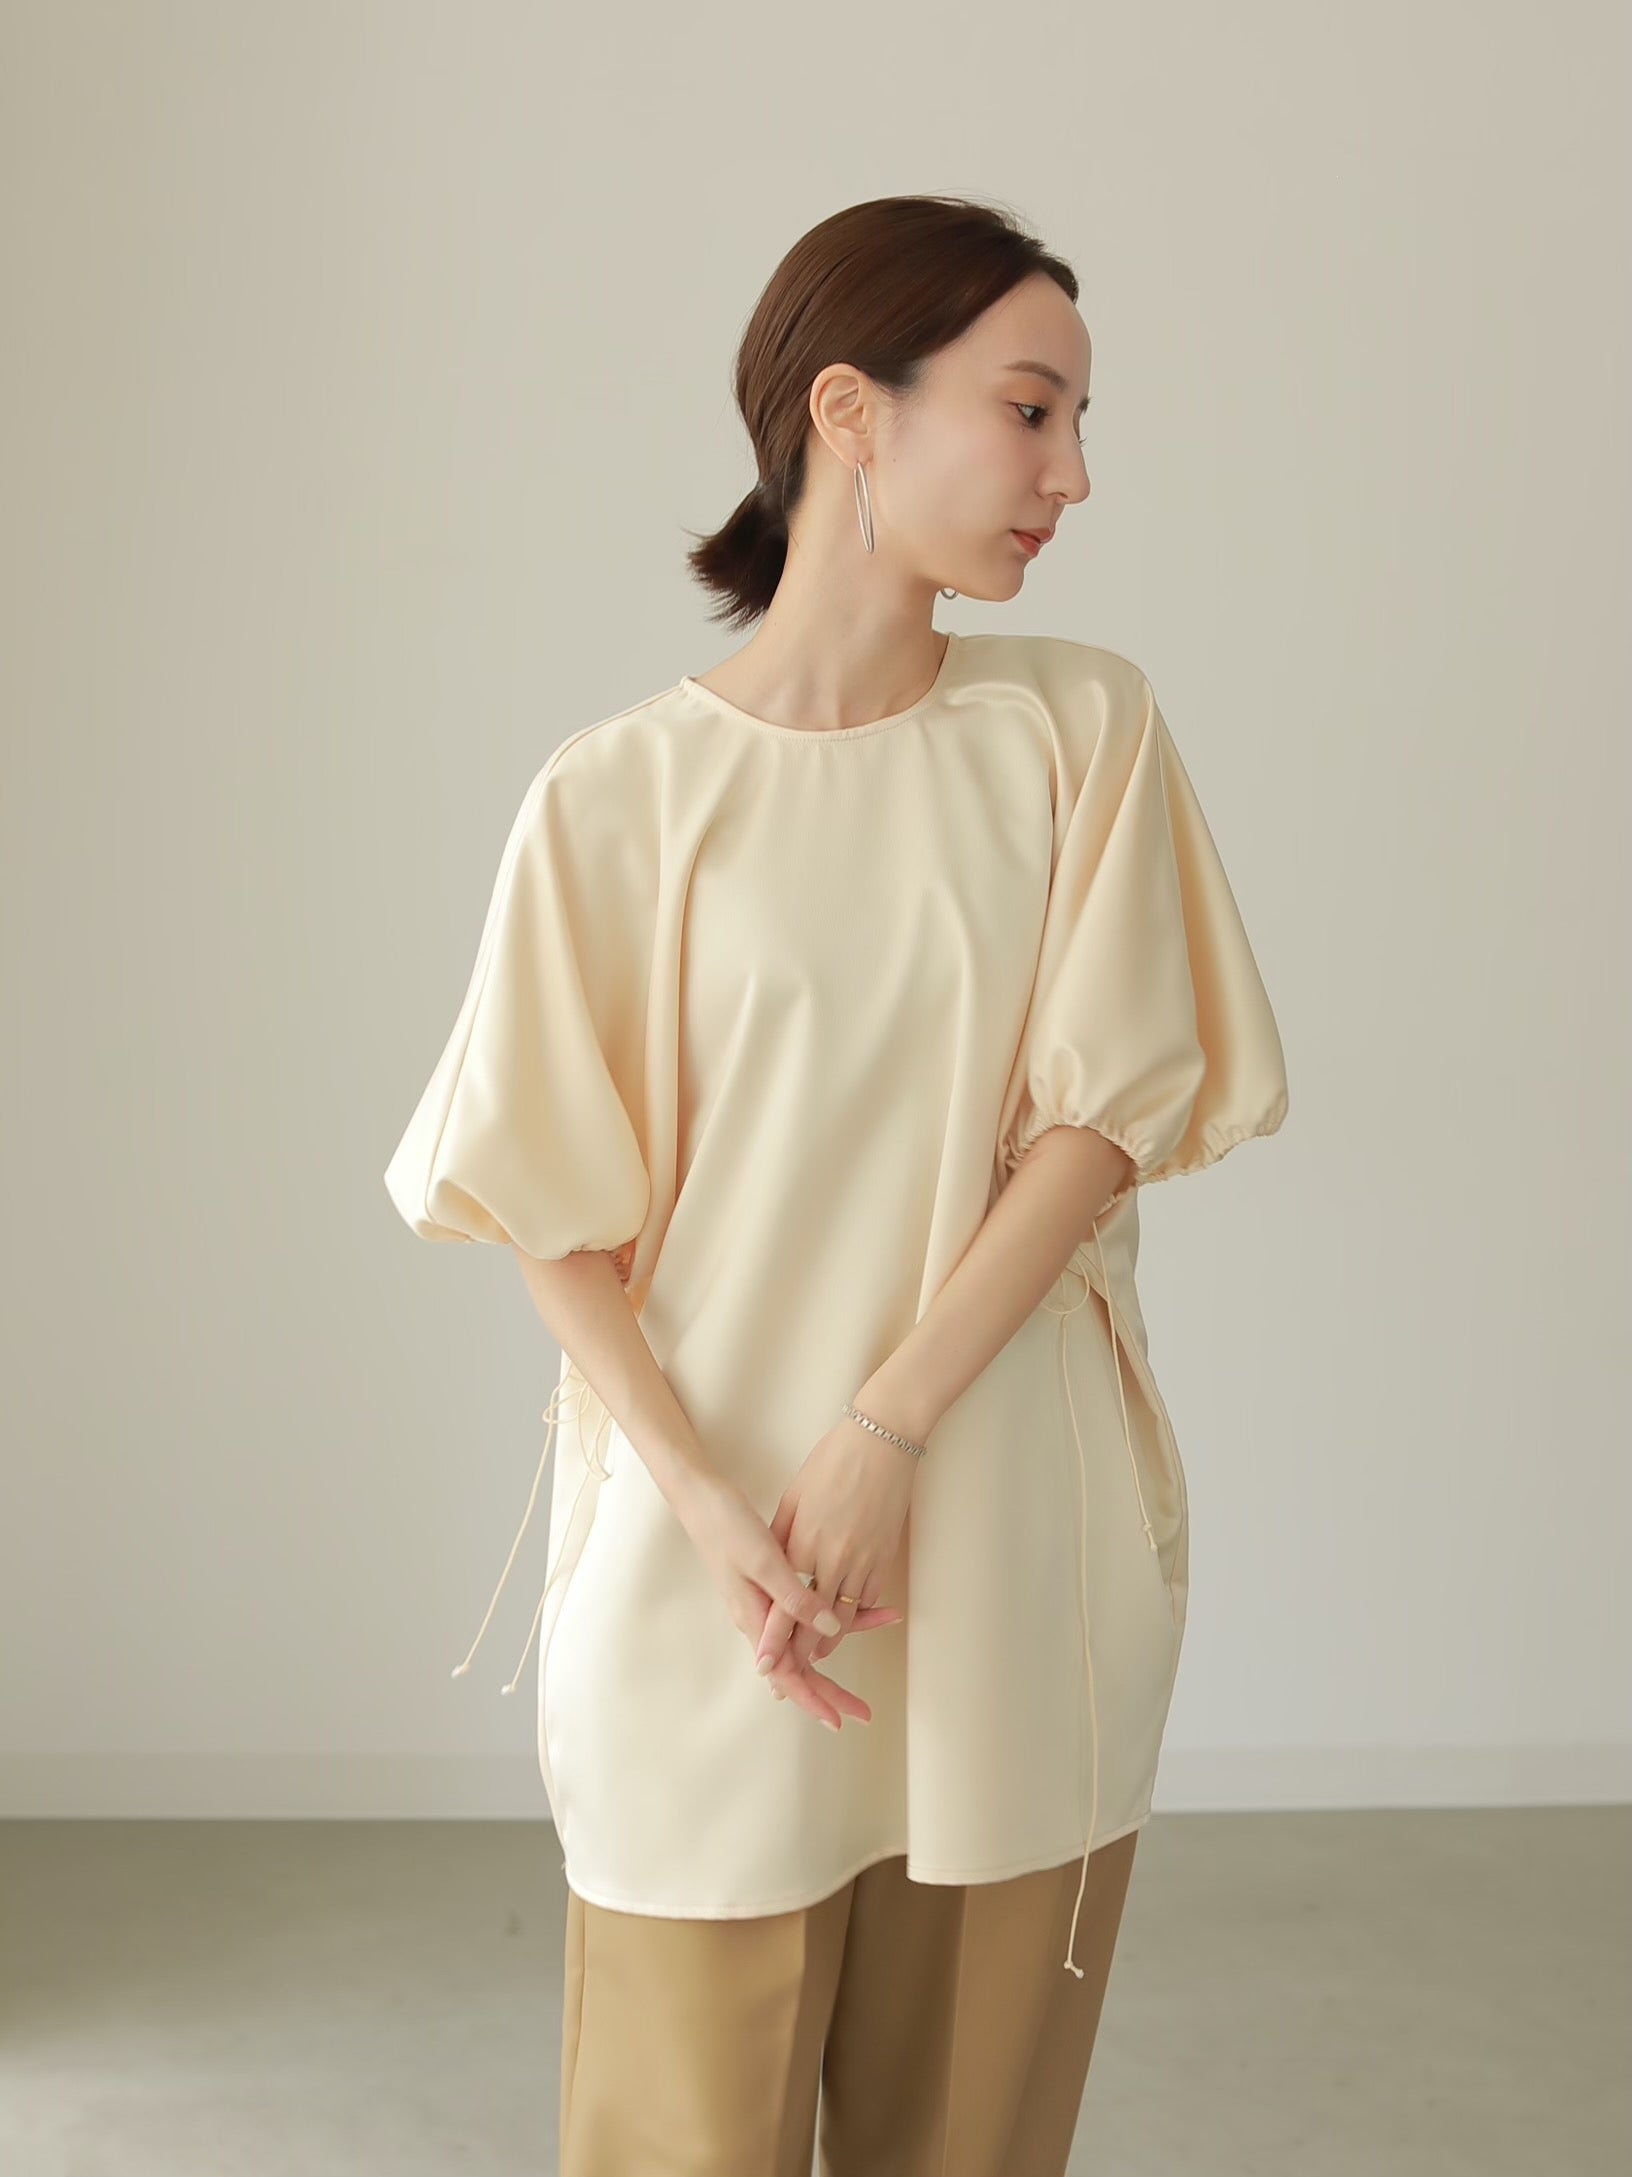 2021 SUMMER COLLECTION vol.1】SATIN GATHER SLEEVE BLOUSE 